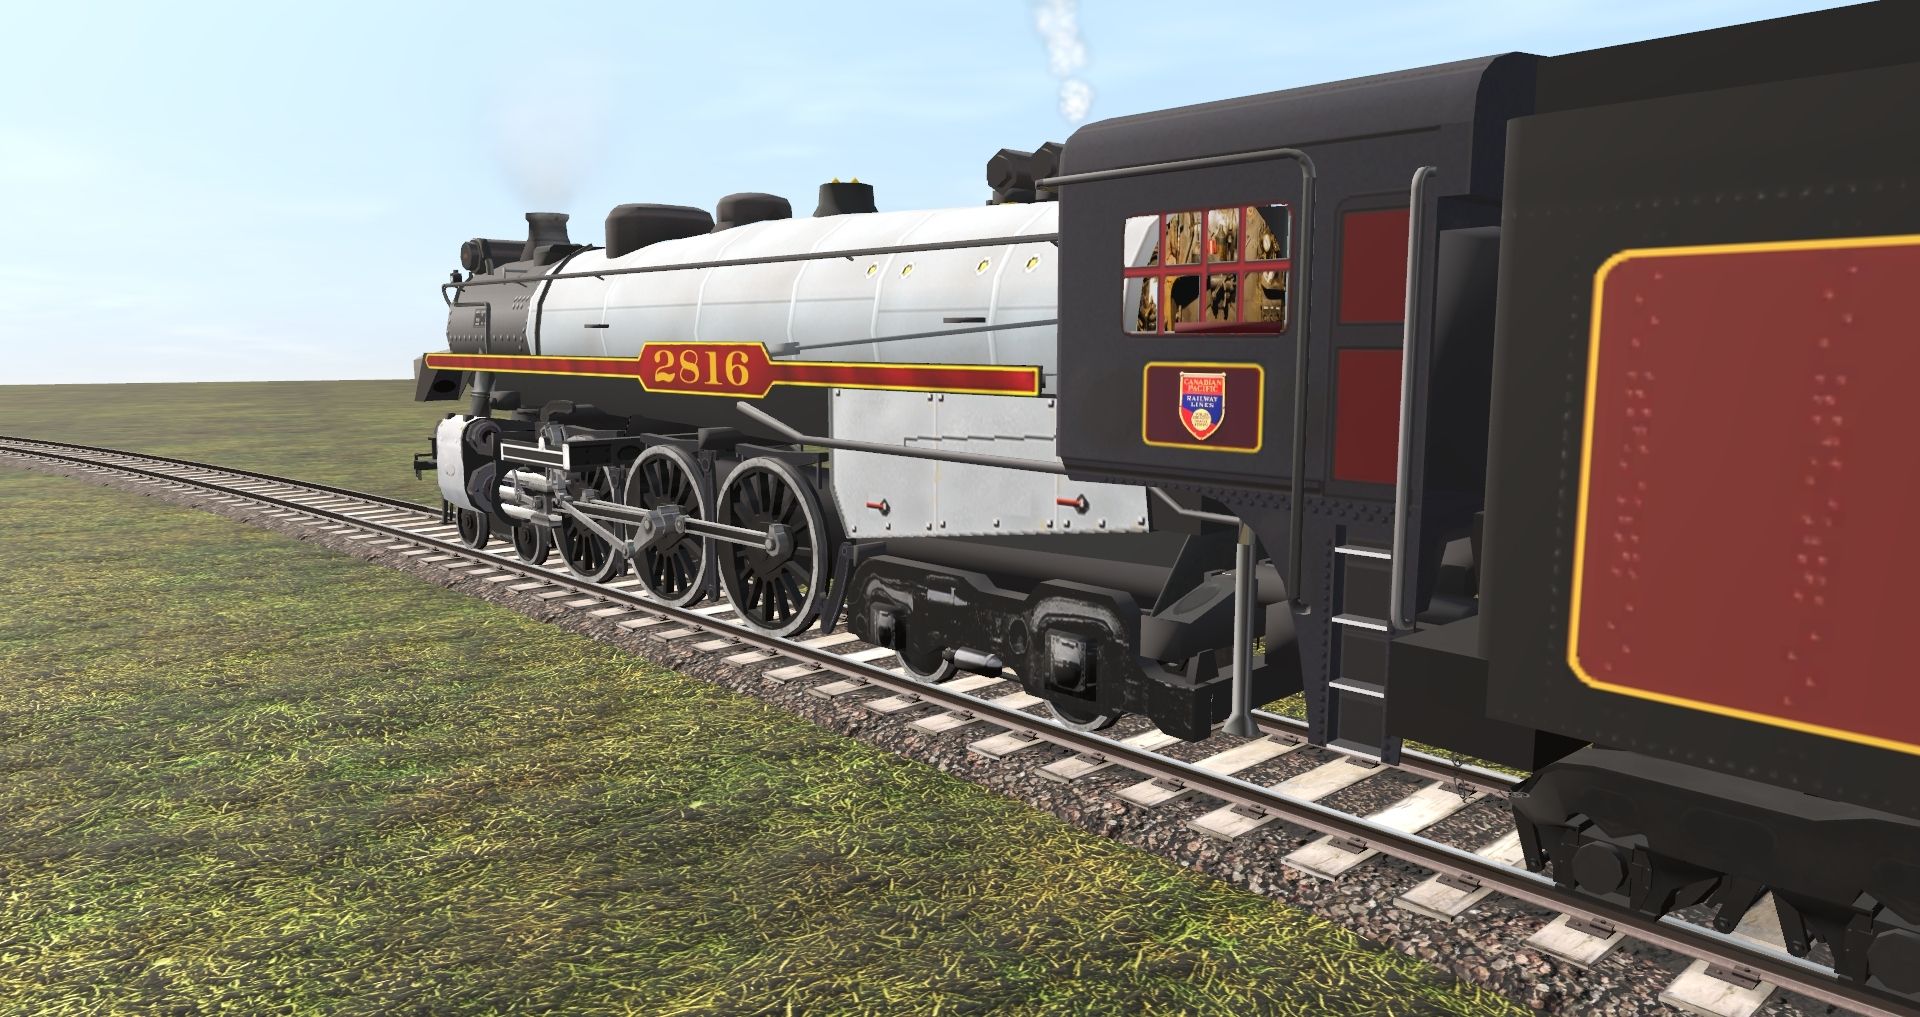 MSTS-To-TRAINZ-Conversion%2C-but-not-without-a-lot-of-tweaks-and-workarounds%2C-but-a-functional-steam-locomotive..jpg